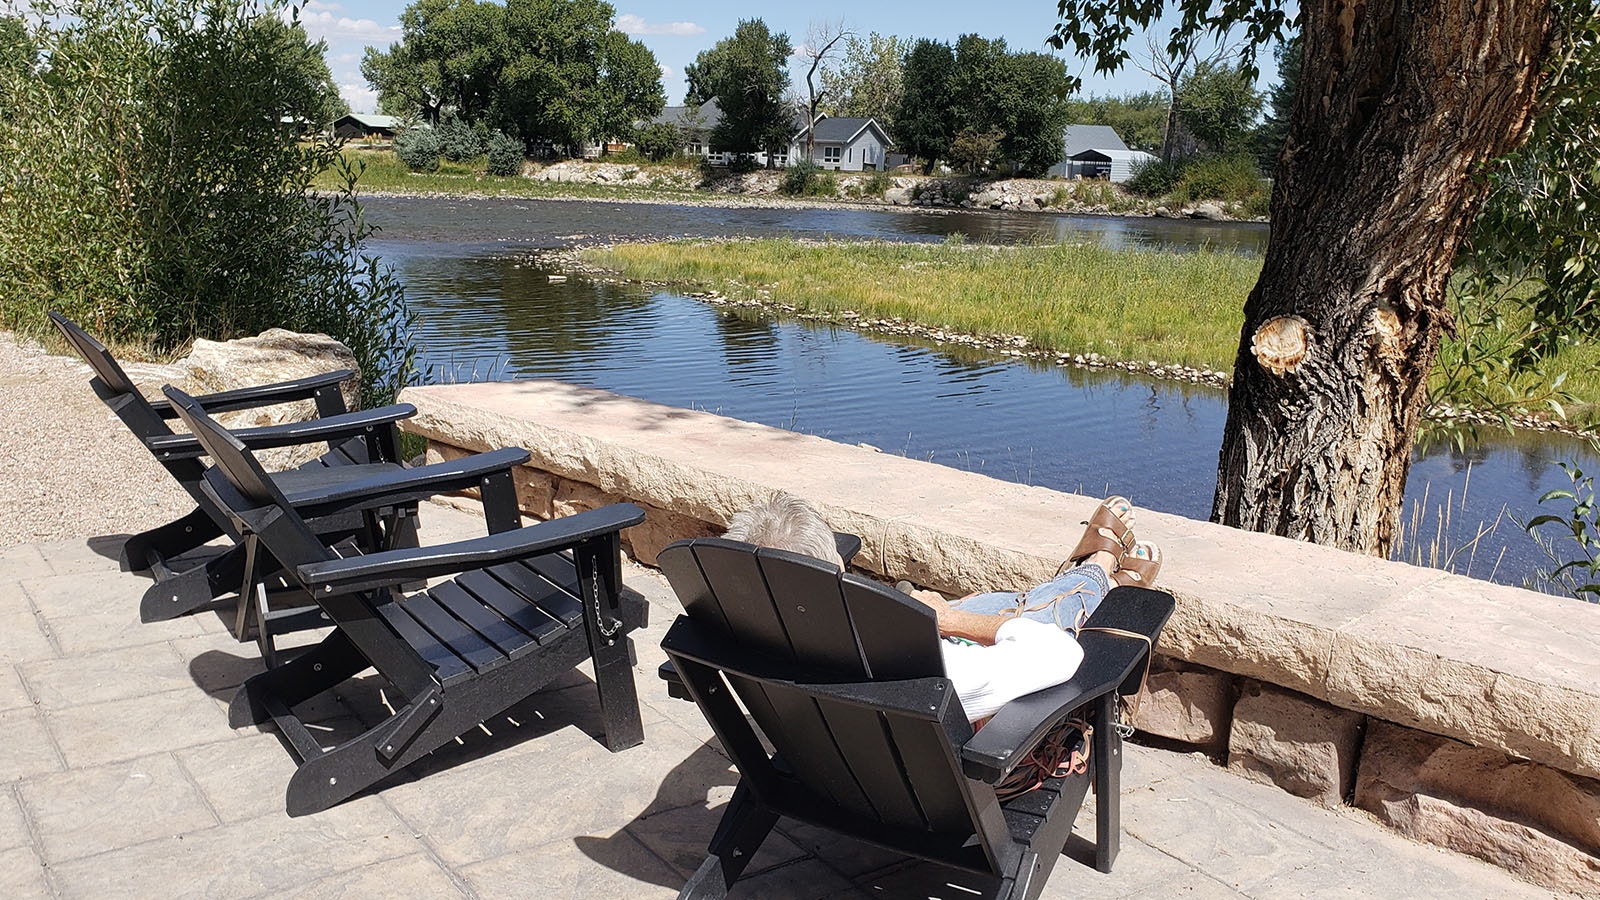 A row of seats offers a quiet spot by the river for taking a nap.